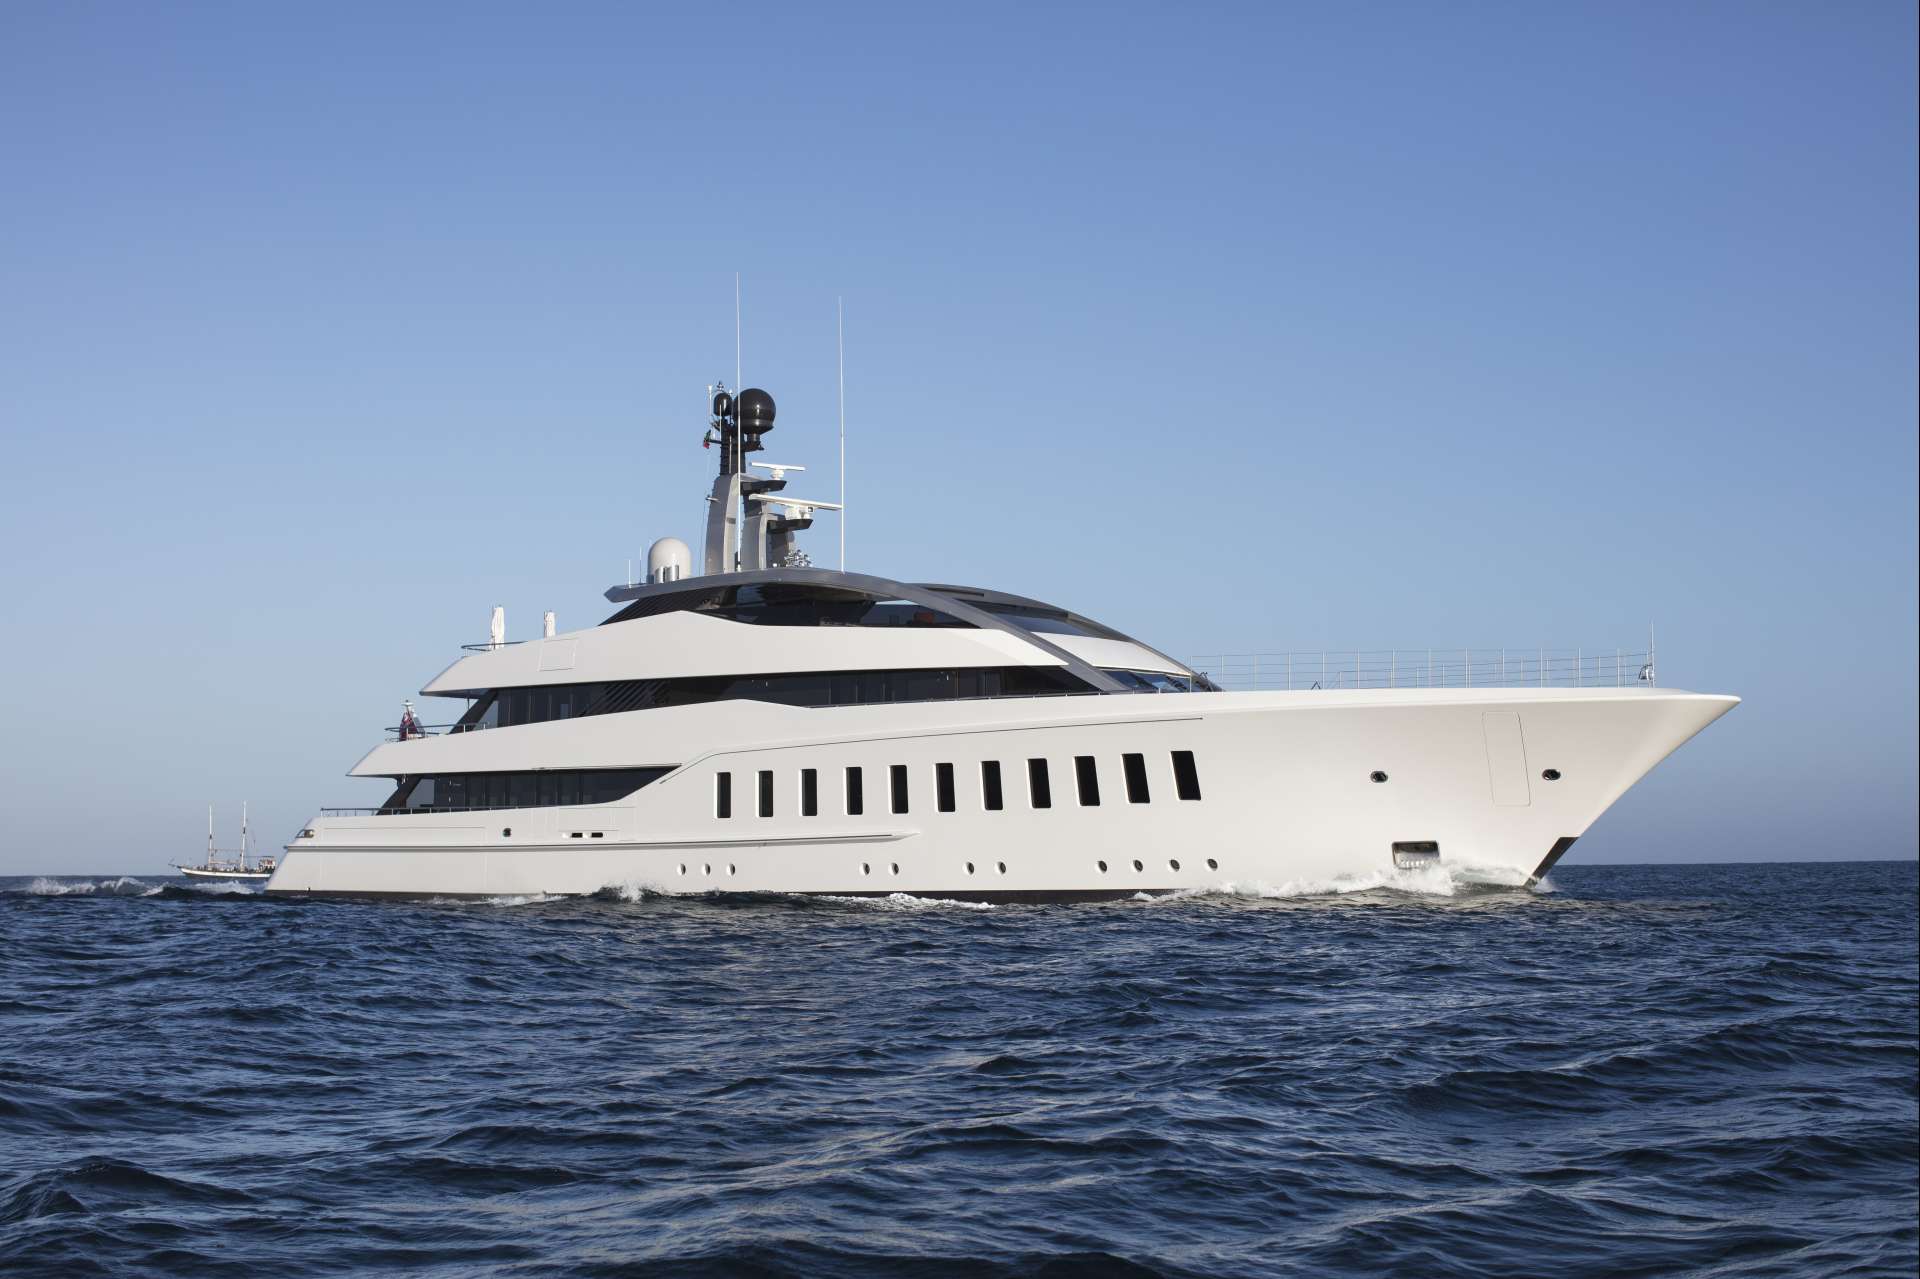 Profile Of The 57m Feadship Yacht